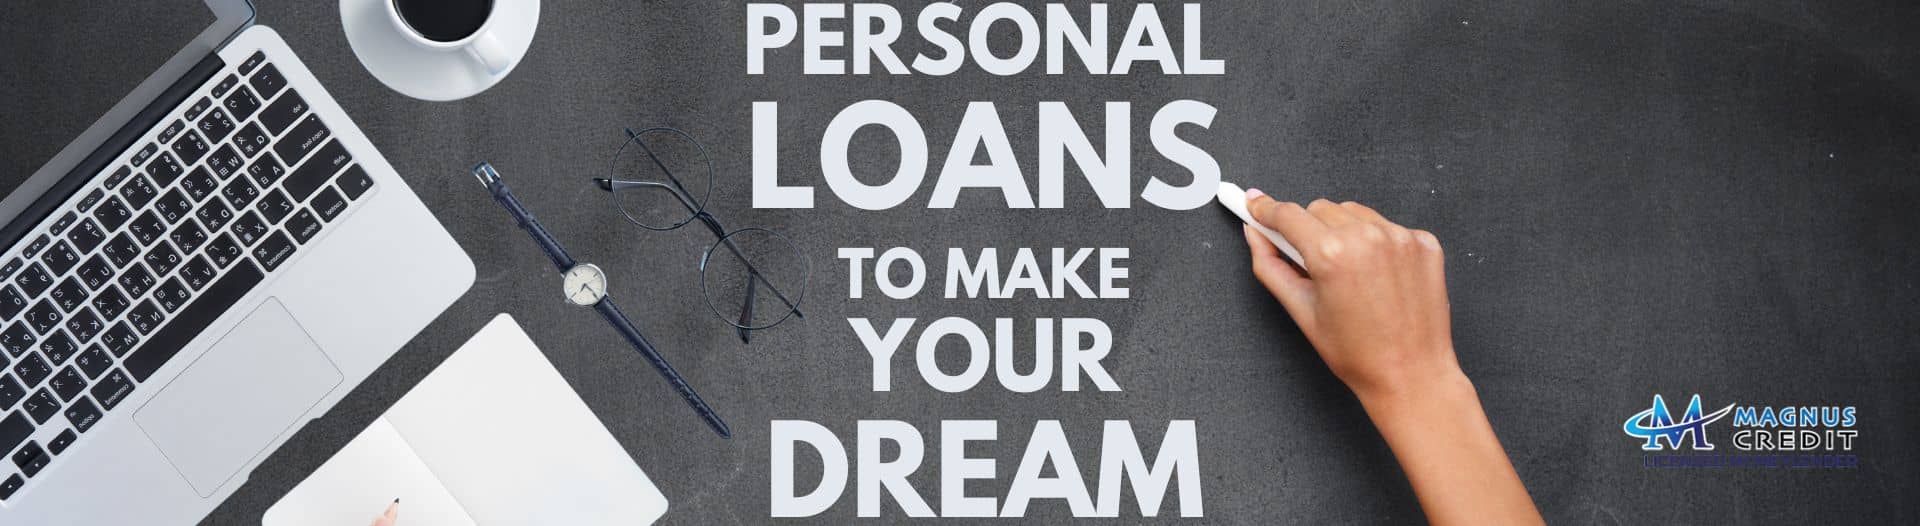 Dream Vacation with Just One Personal Loan